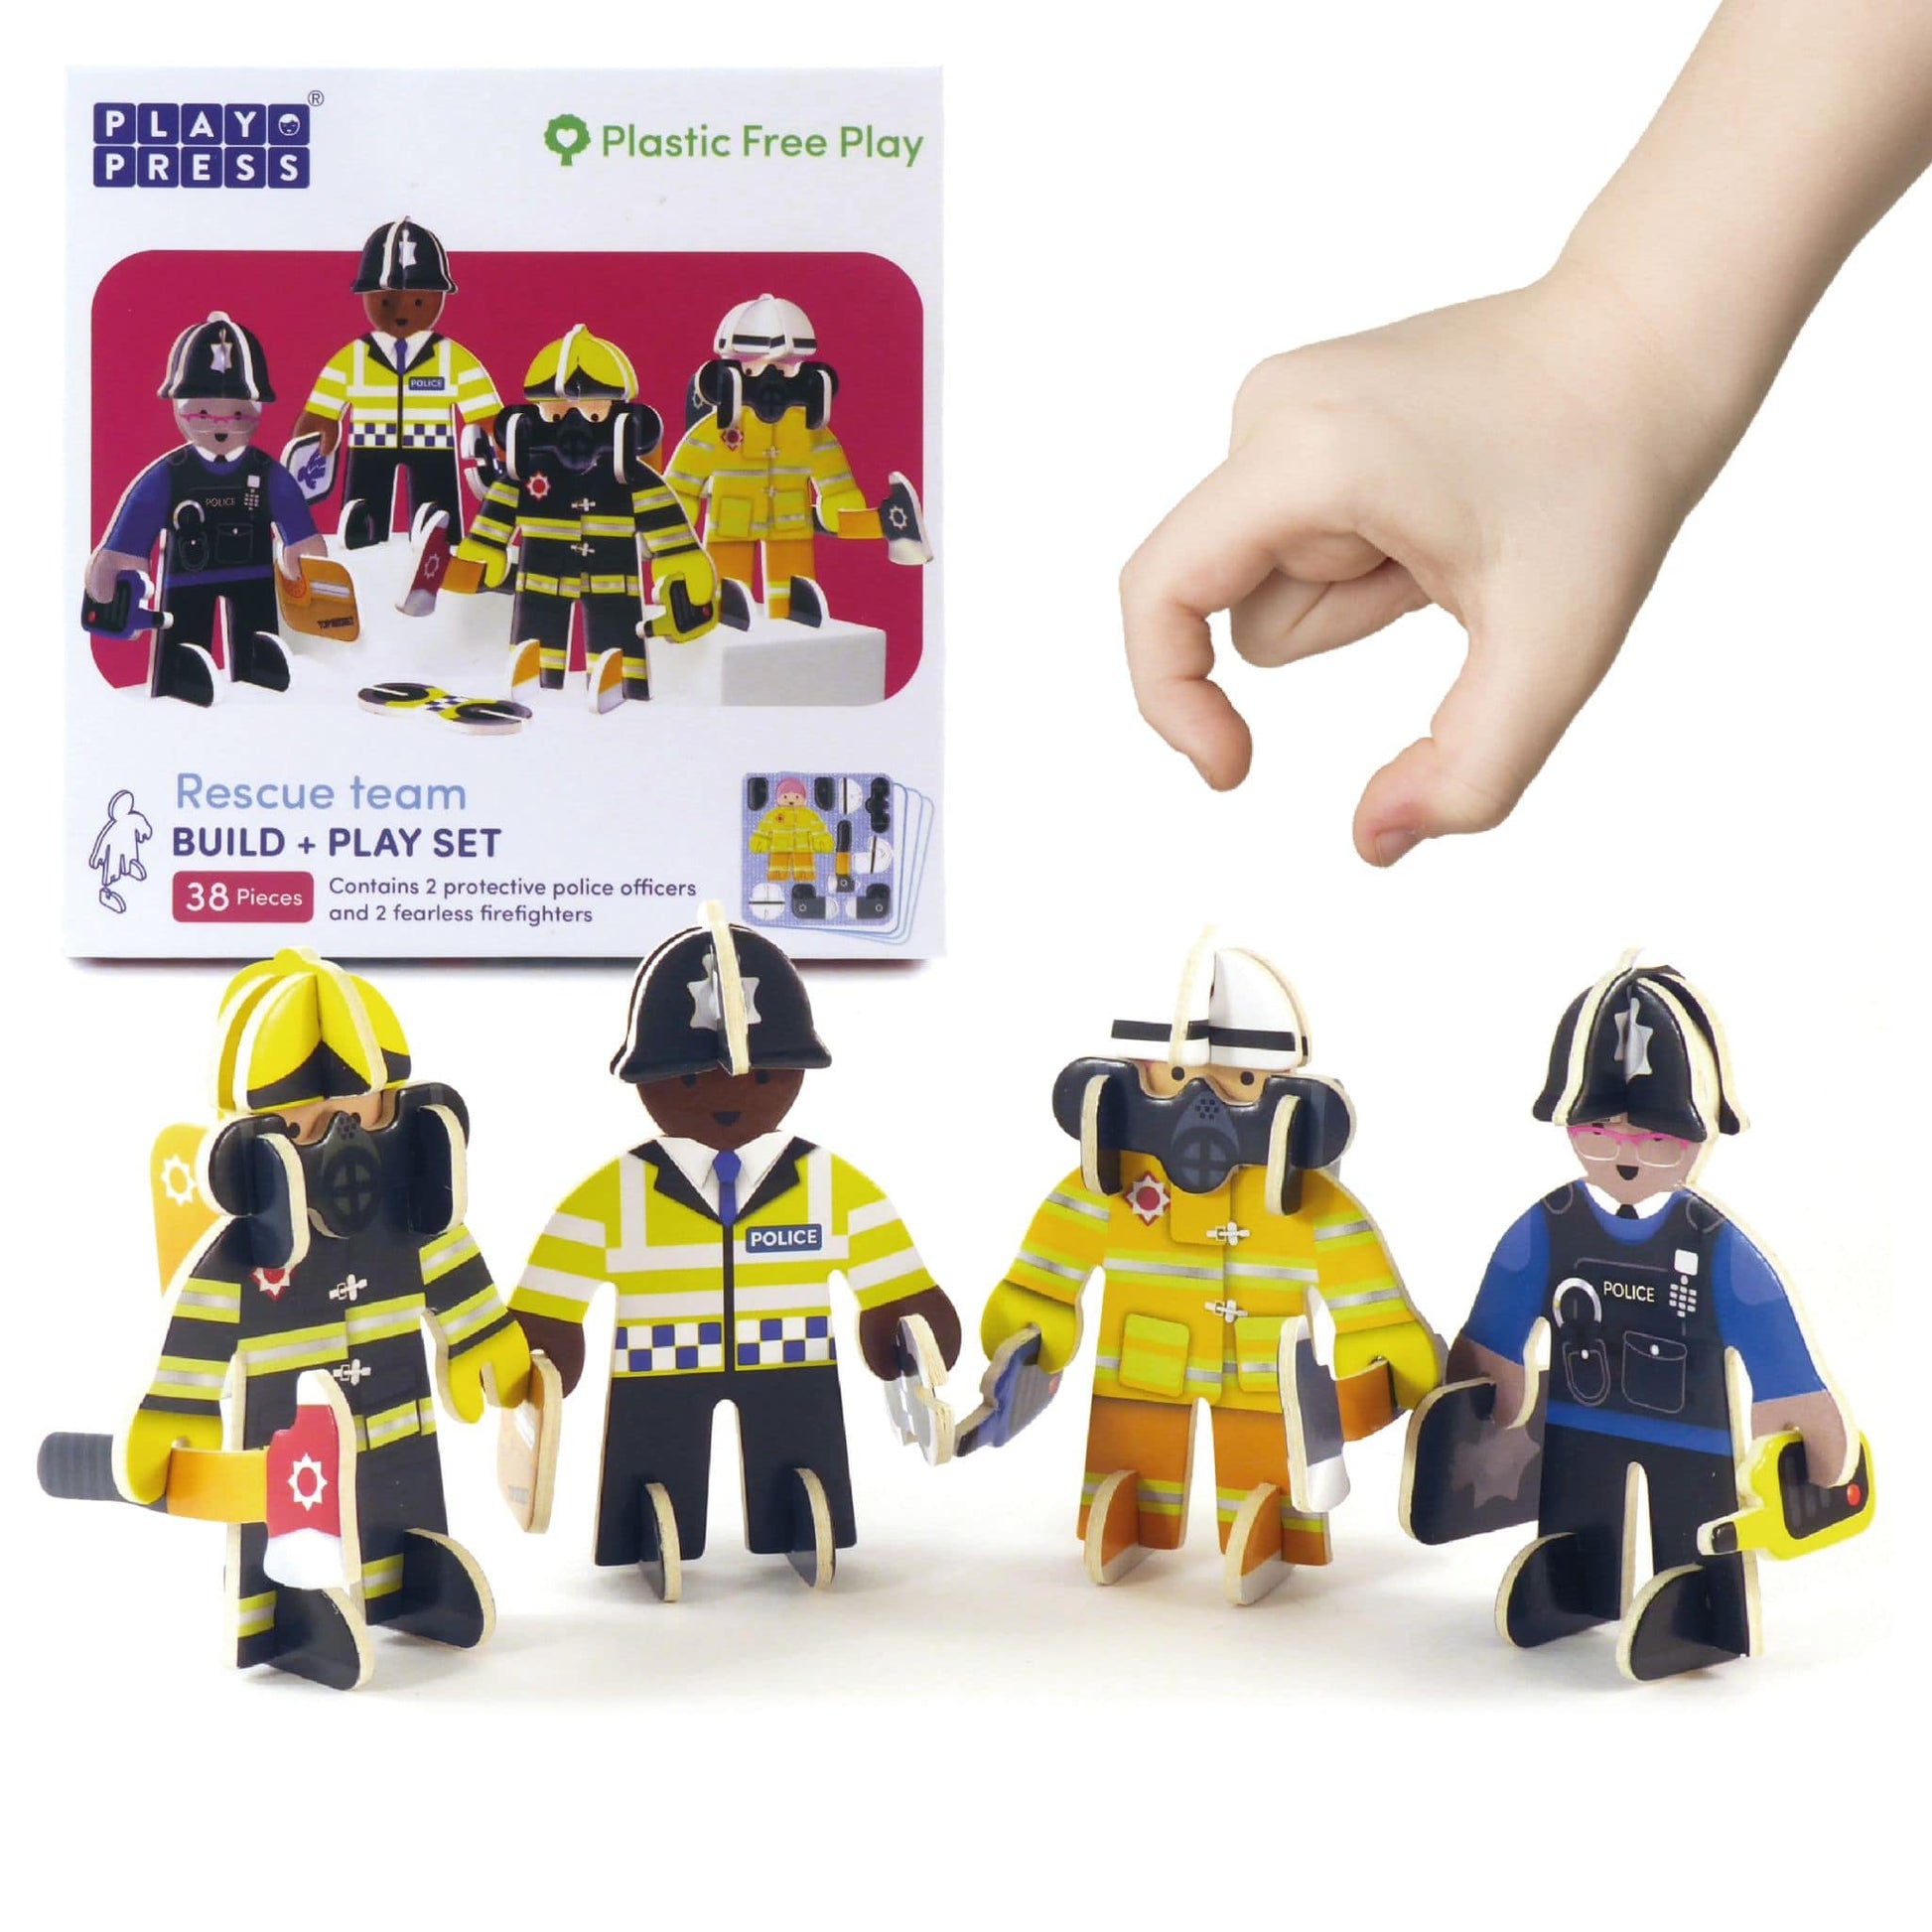 Build and play rescue team - with hand